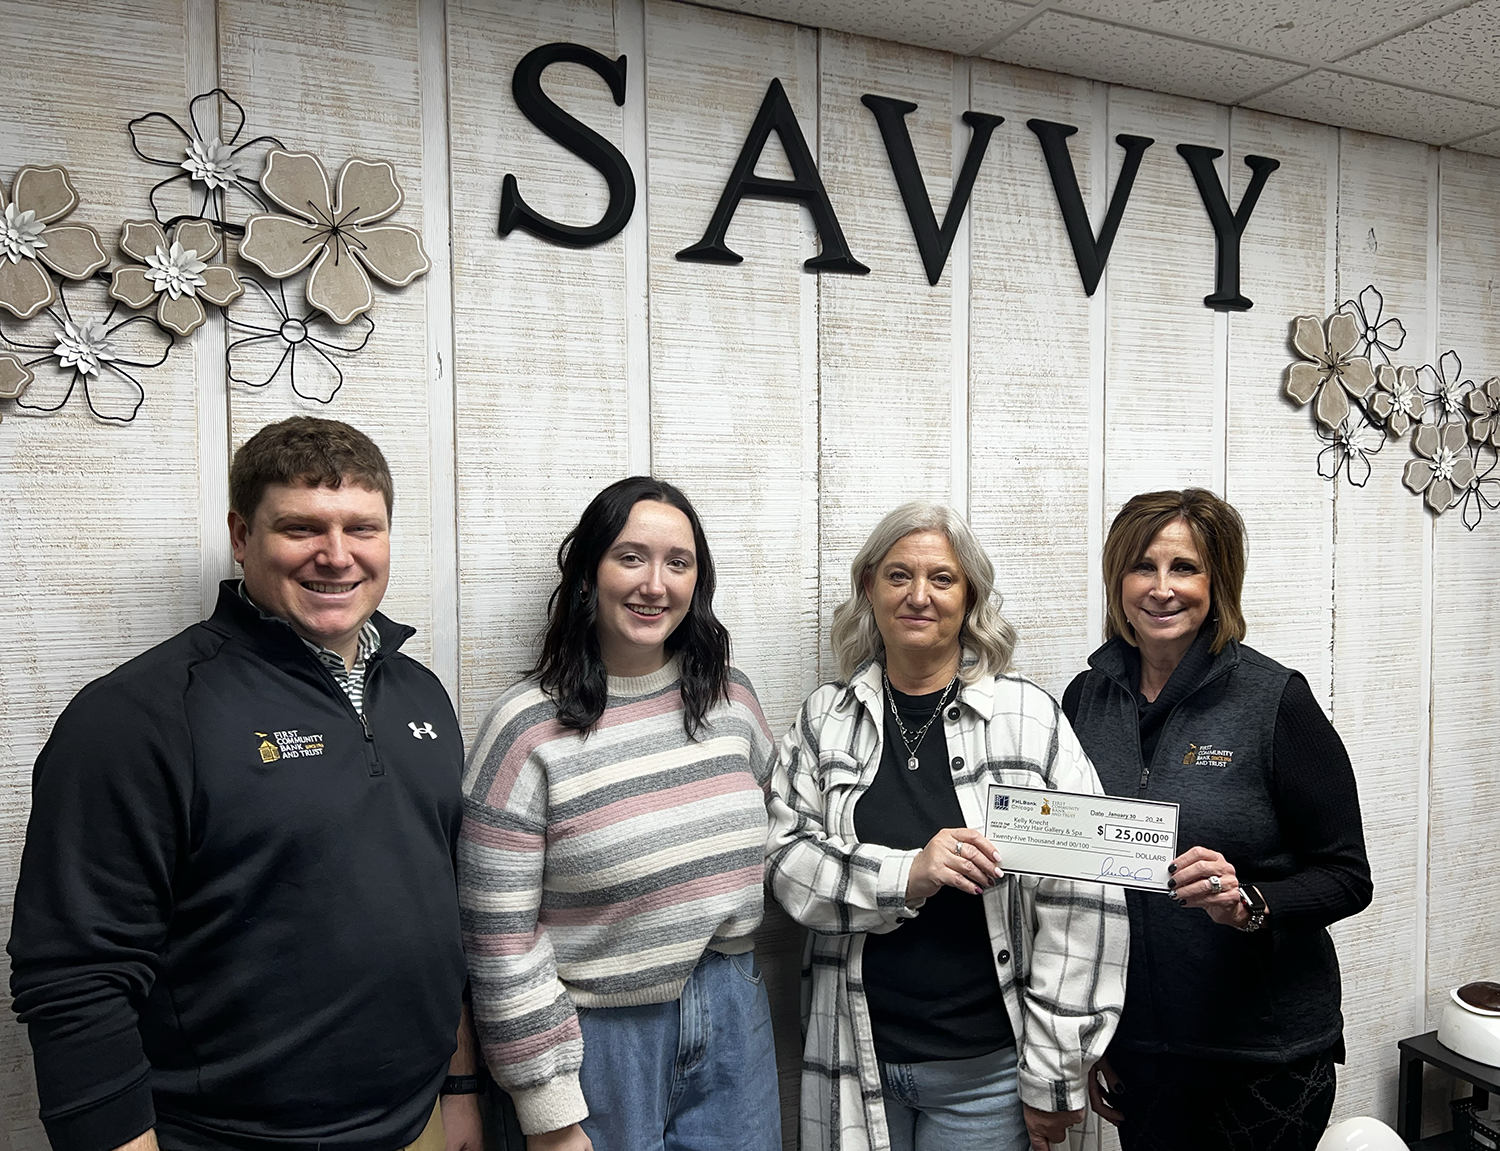 Kelly Knecht, Savvy Hair Gallery & Spa Recipient of FHLB and FCBT $25,000 Community First Accelerate Grant